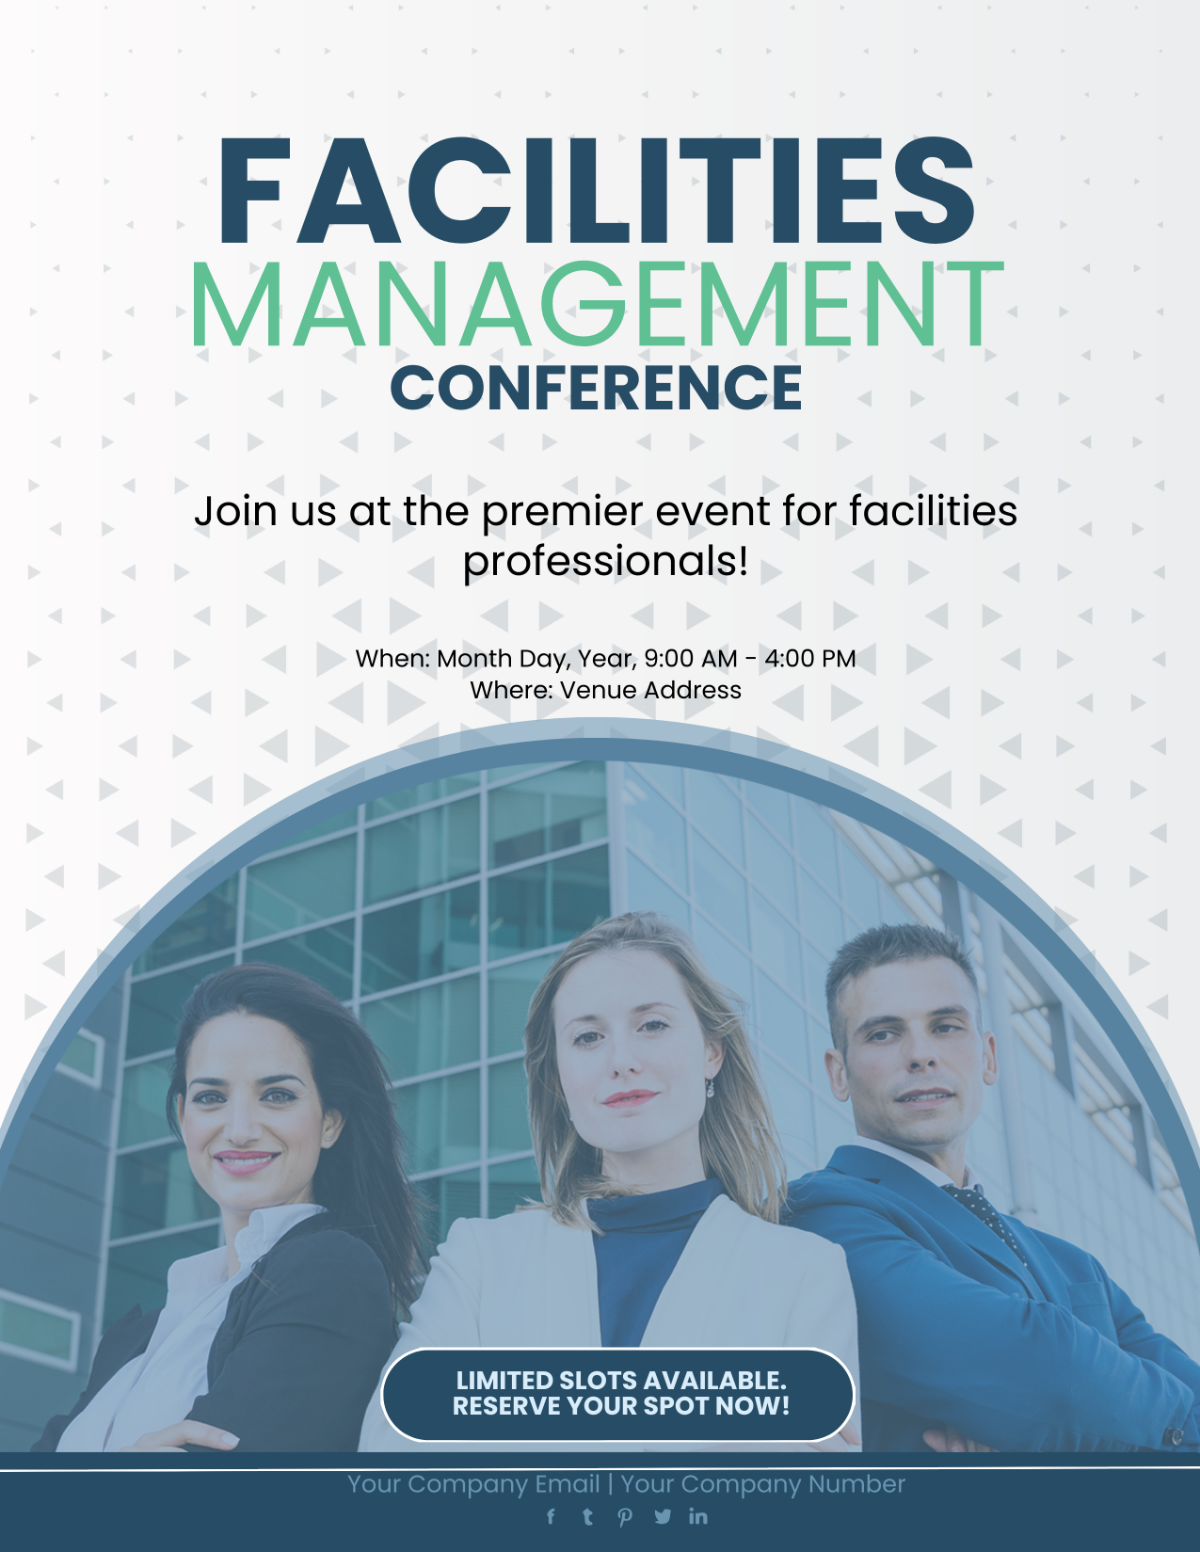 Facilities Management Conference Flyer Template